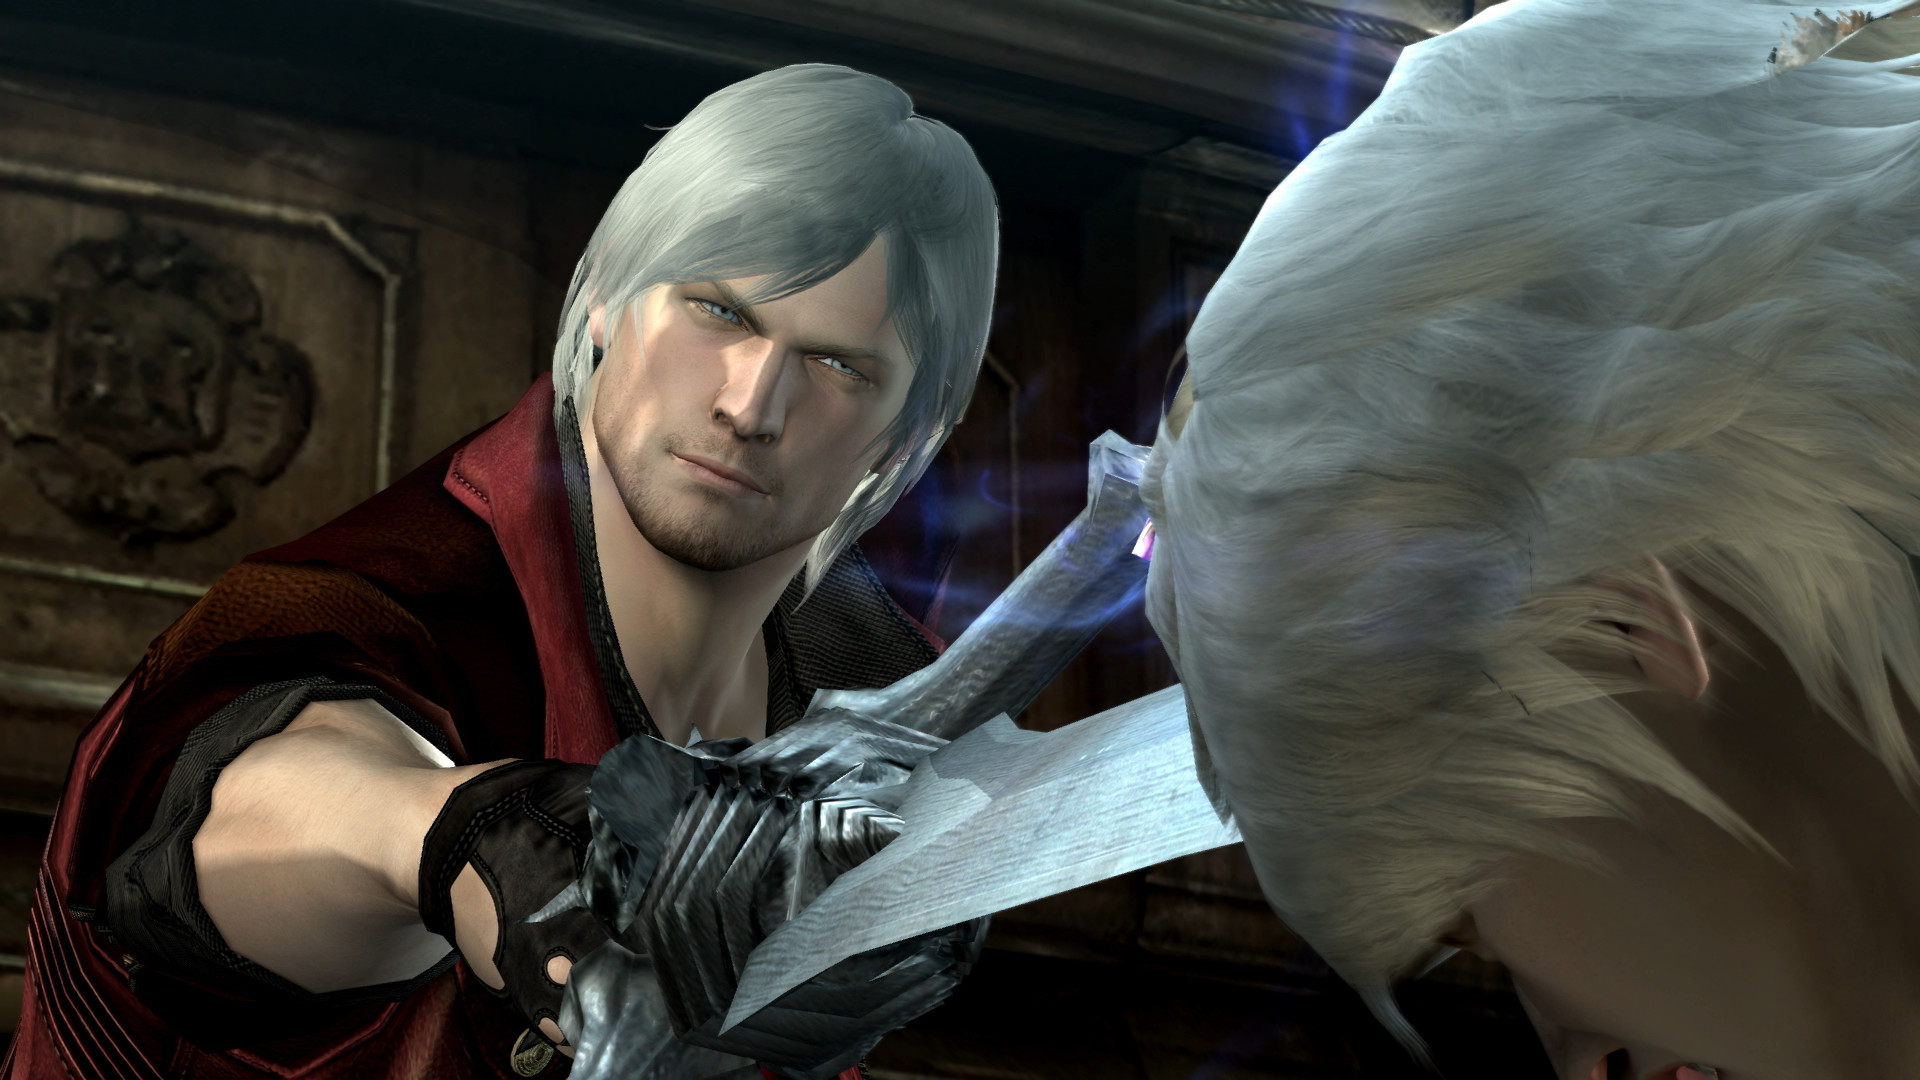 Steam Community :: Devil May Cry 3: Special Edition